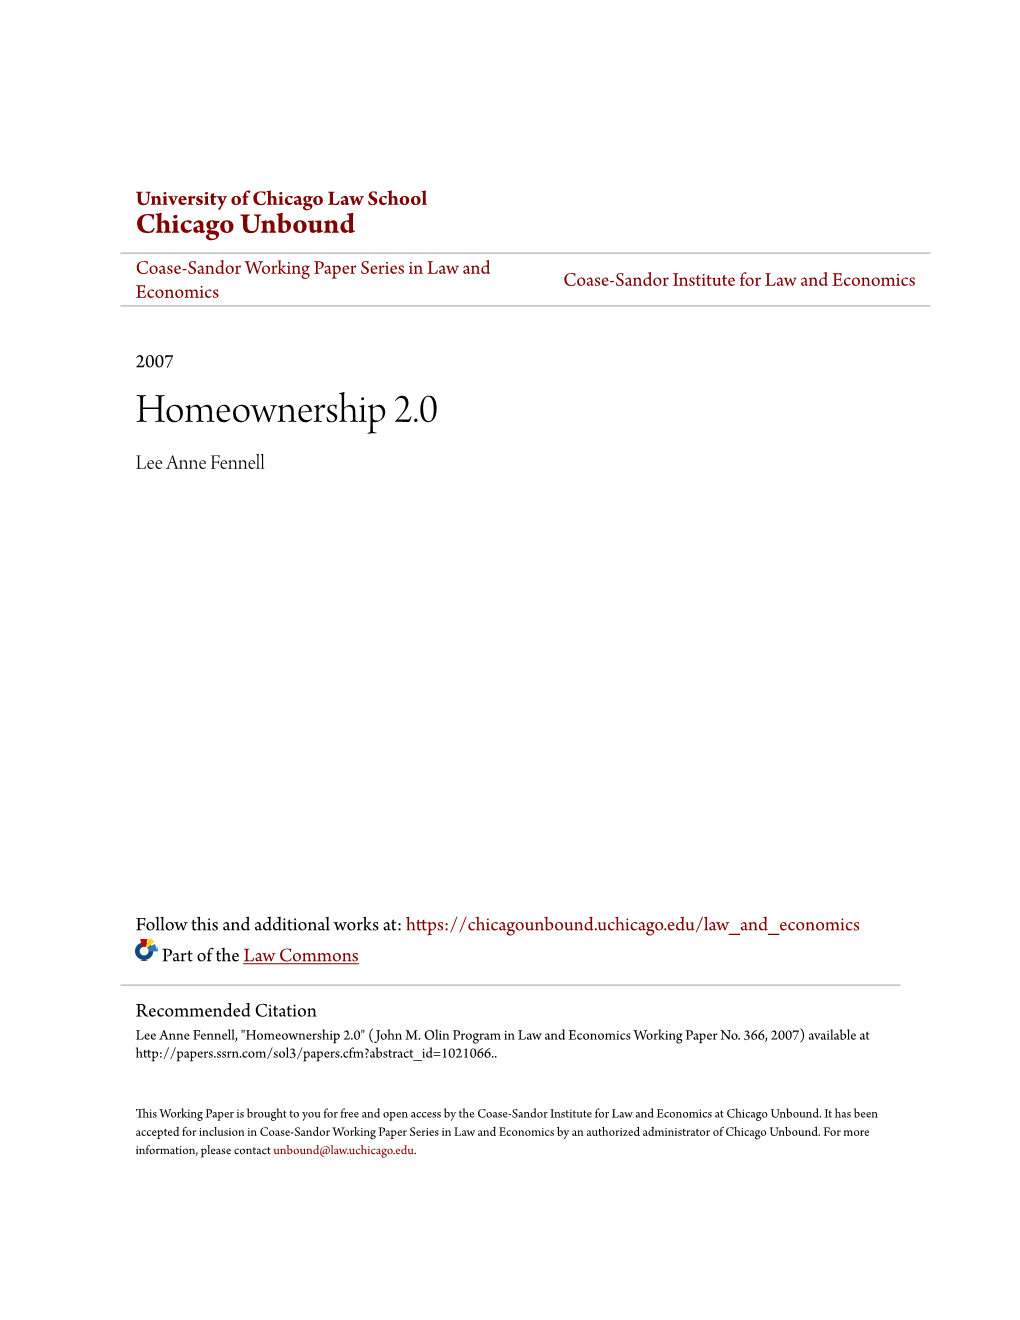 Homeownership 2.0 Lee Anne Fennell